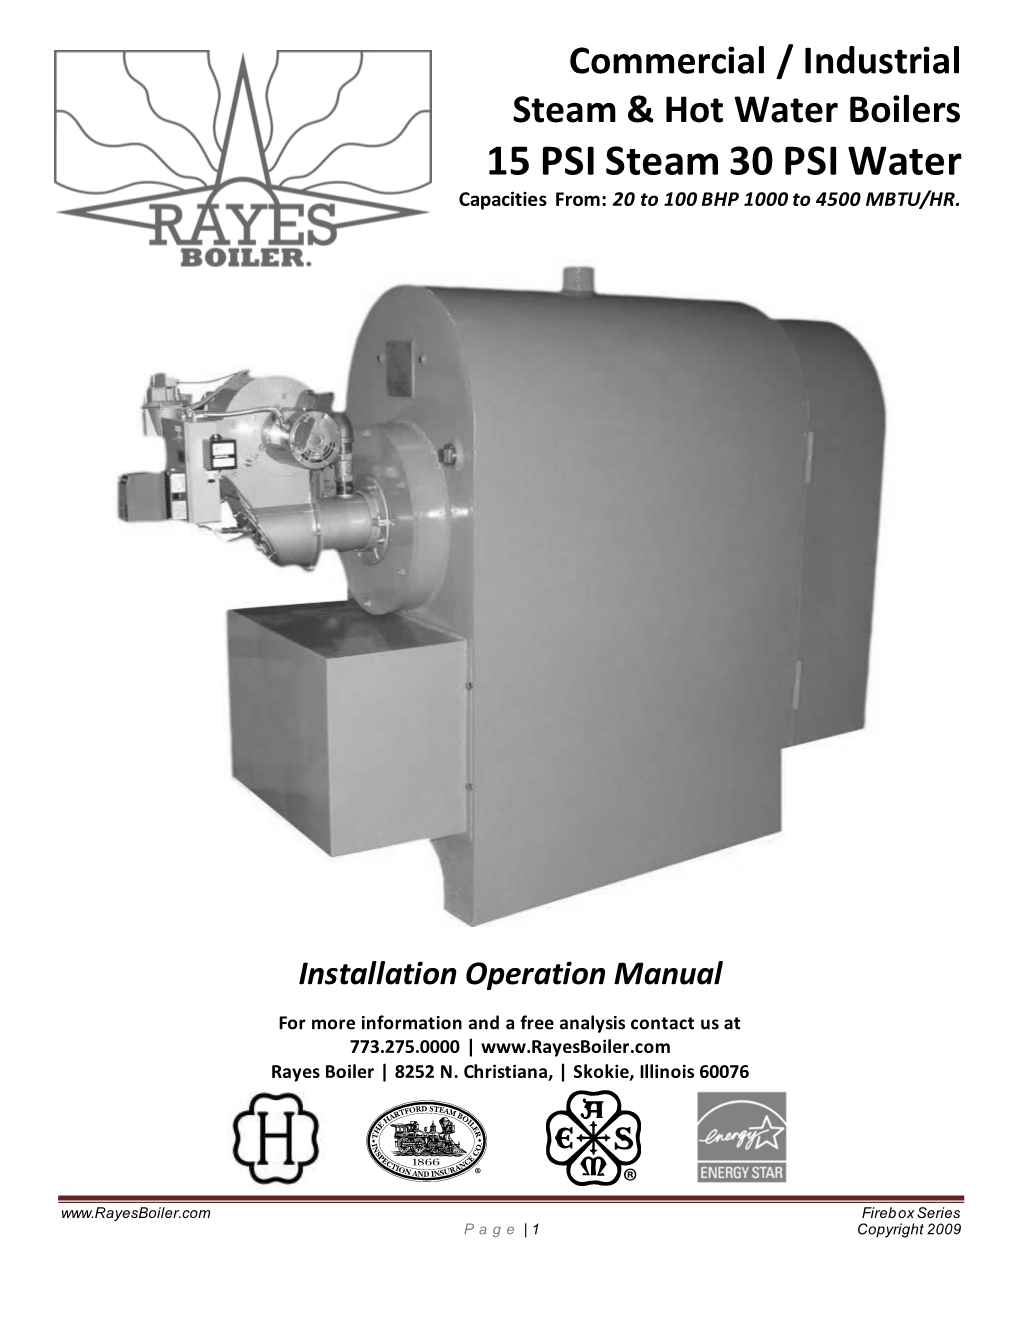 15 PSI Steam 30 PSI Water Capacities From: 20 to 100 BHP 1000 to 4500 MBTU/HR